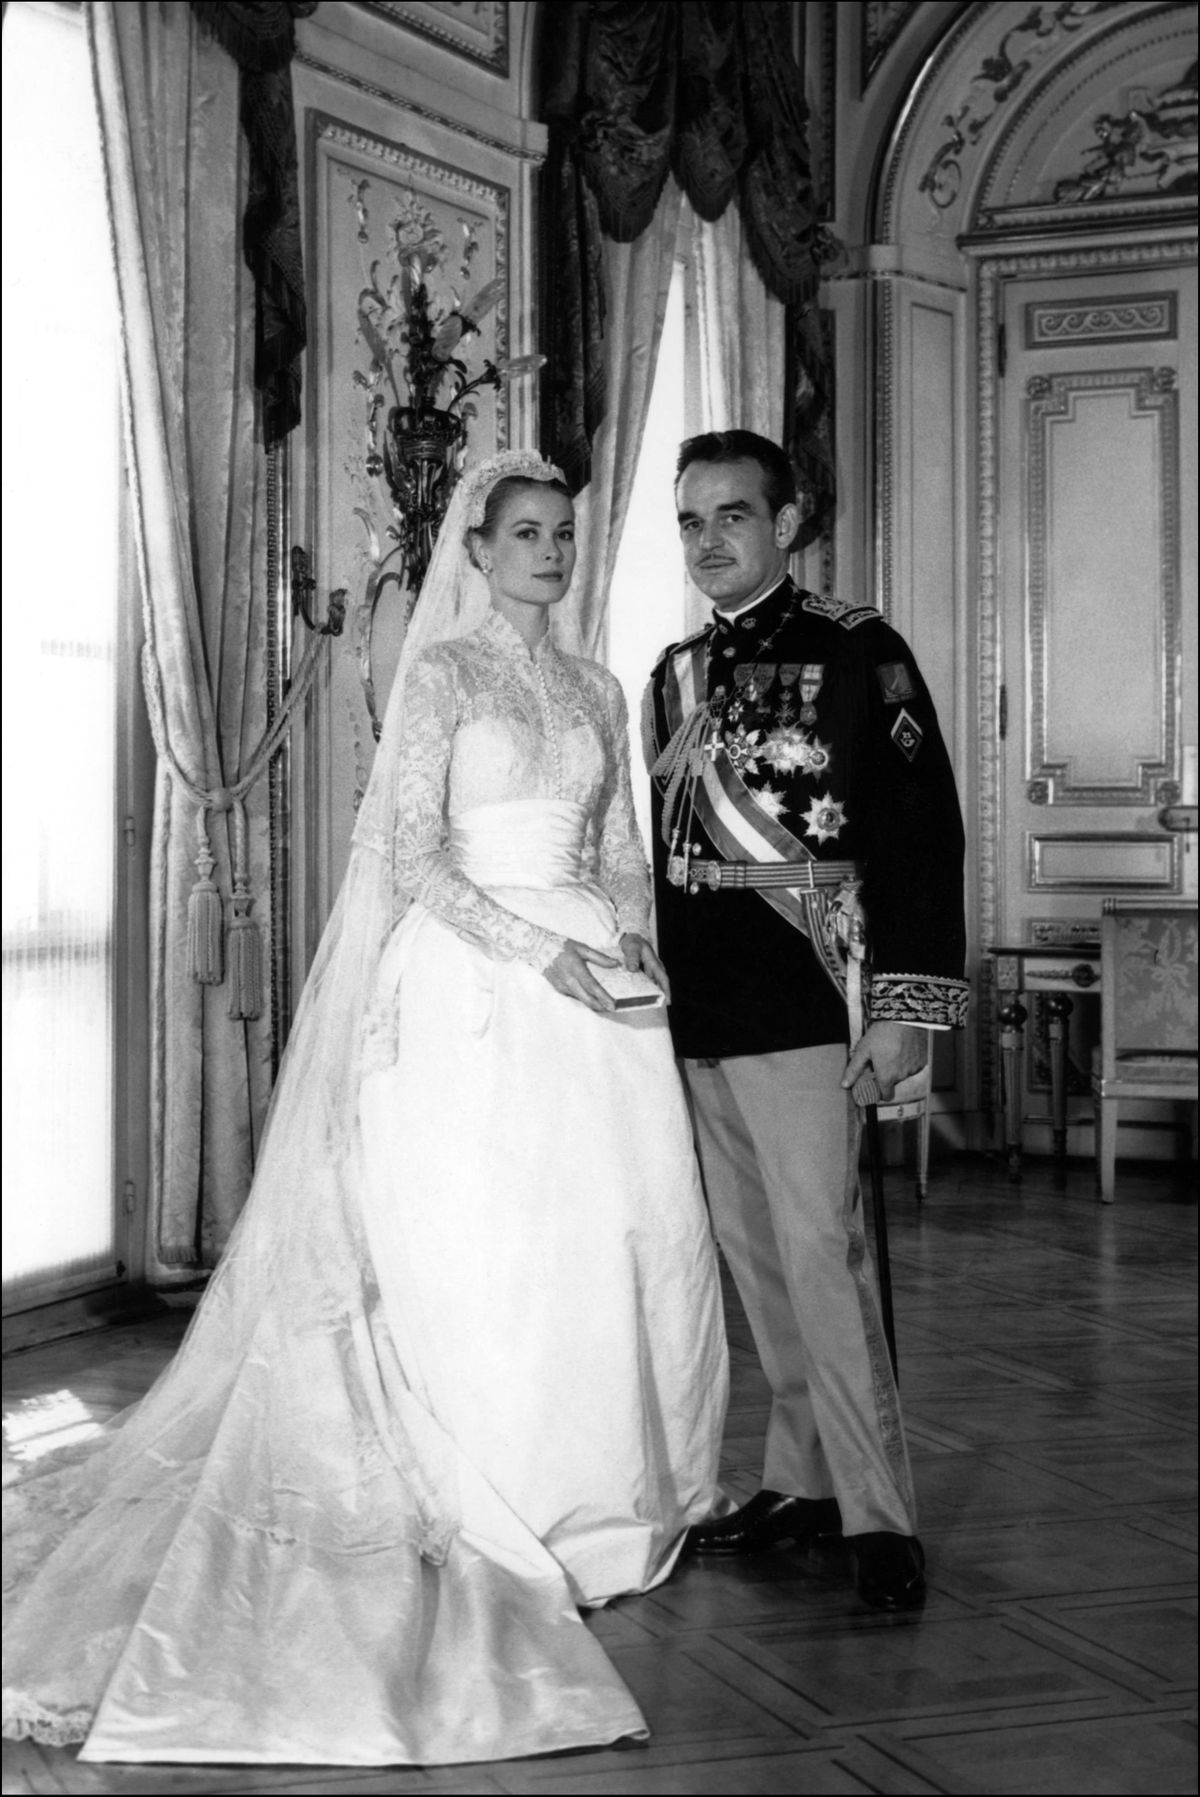 Grace Kelly and Prince Rainier of Monaco during their wedding ceremony in Monaco on April 19, 1956. (Photo by AFP)